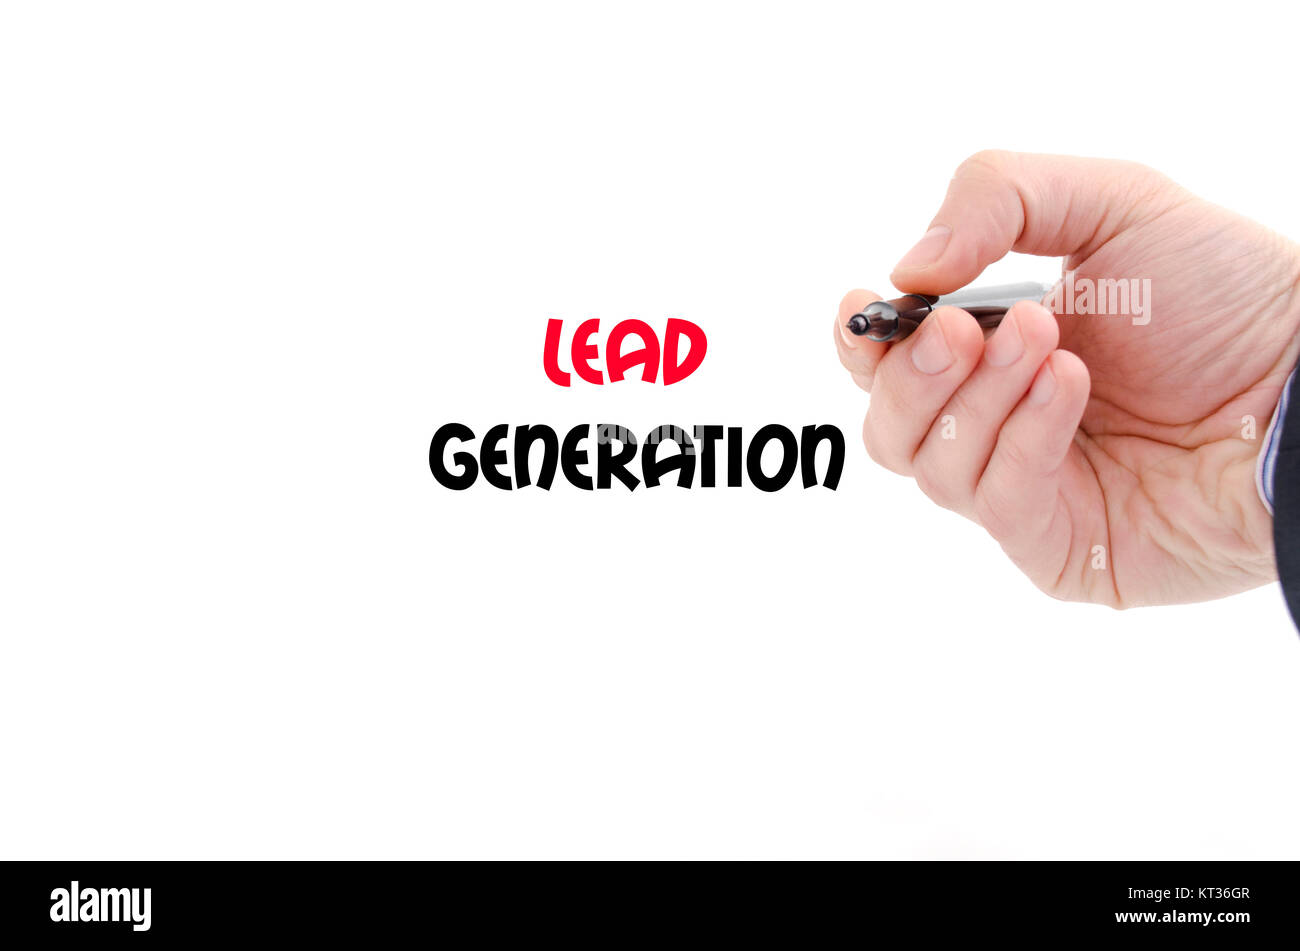 Lead generation text concept Stock Photo